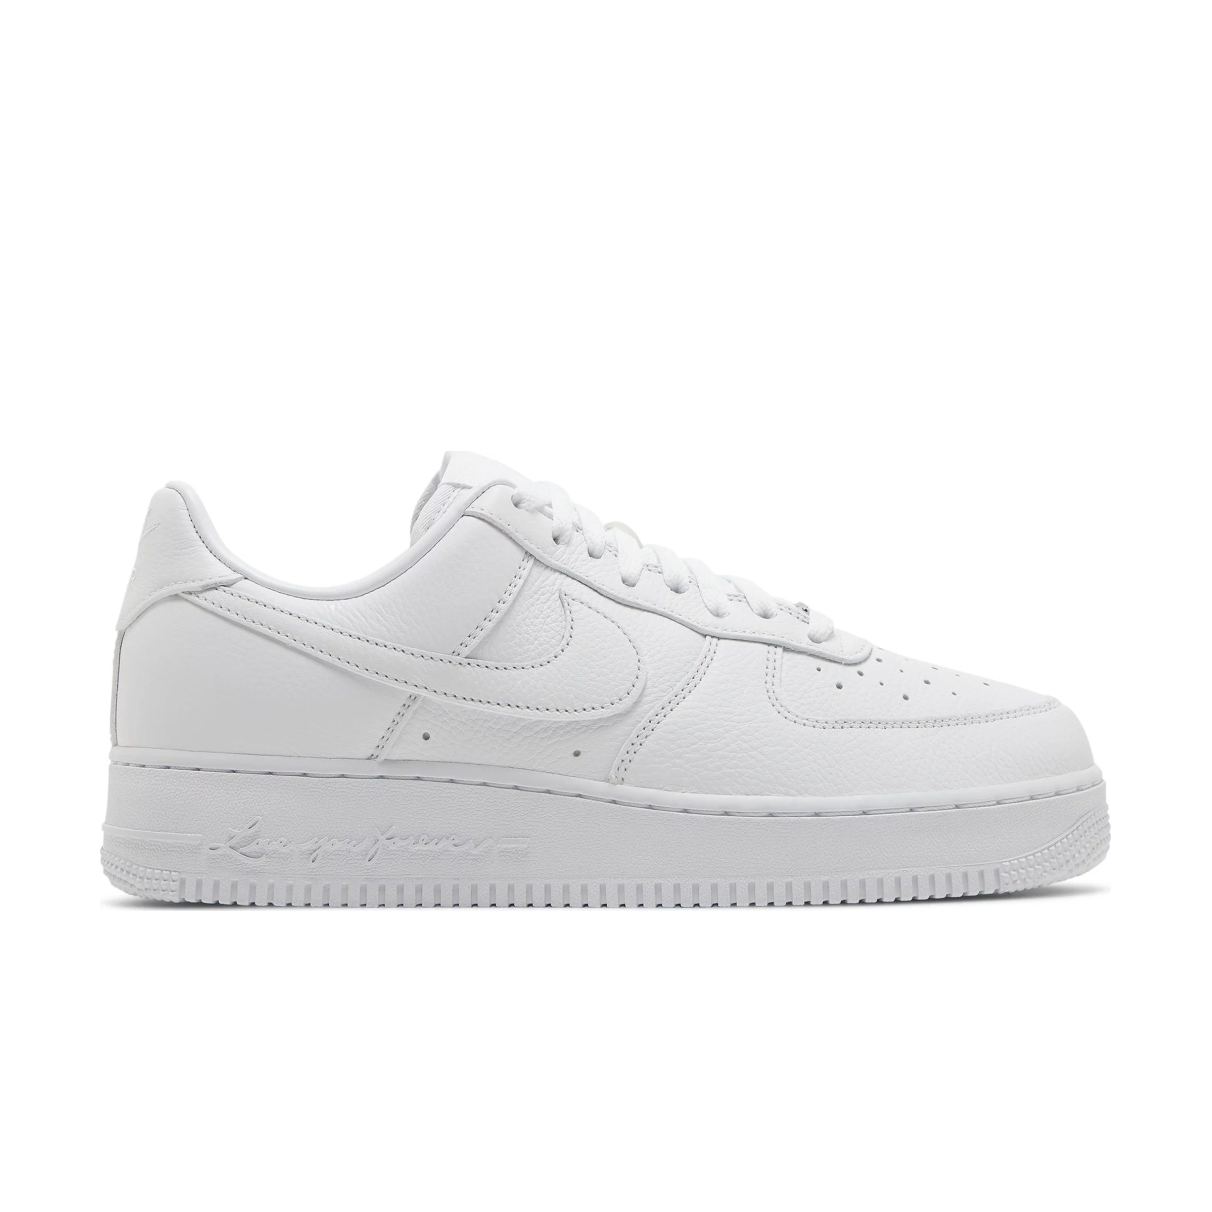 NOCTA x Air Force 1 Low Certified Lover Boy